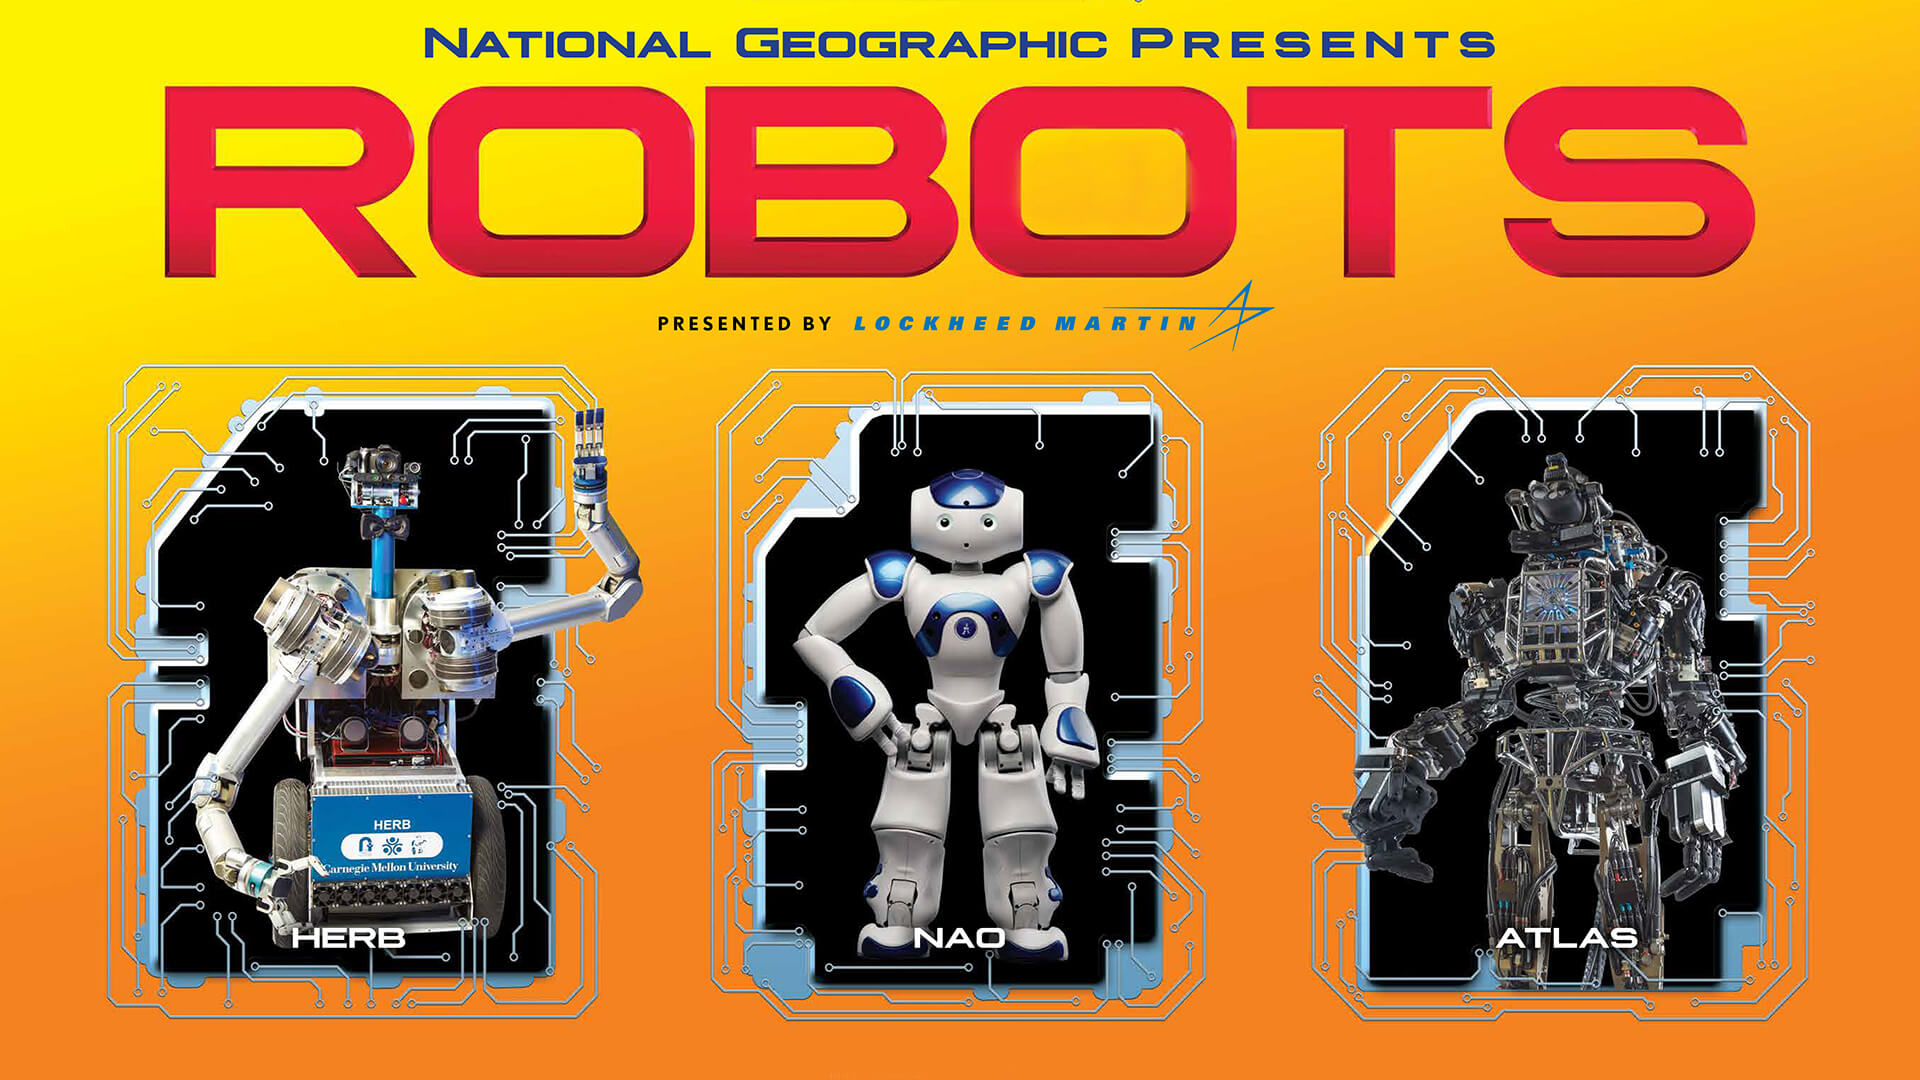 National Geographic Presents Robots